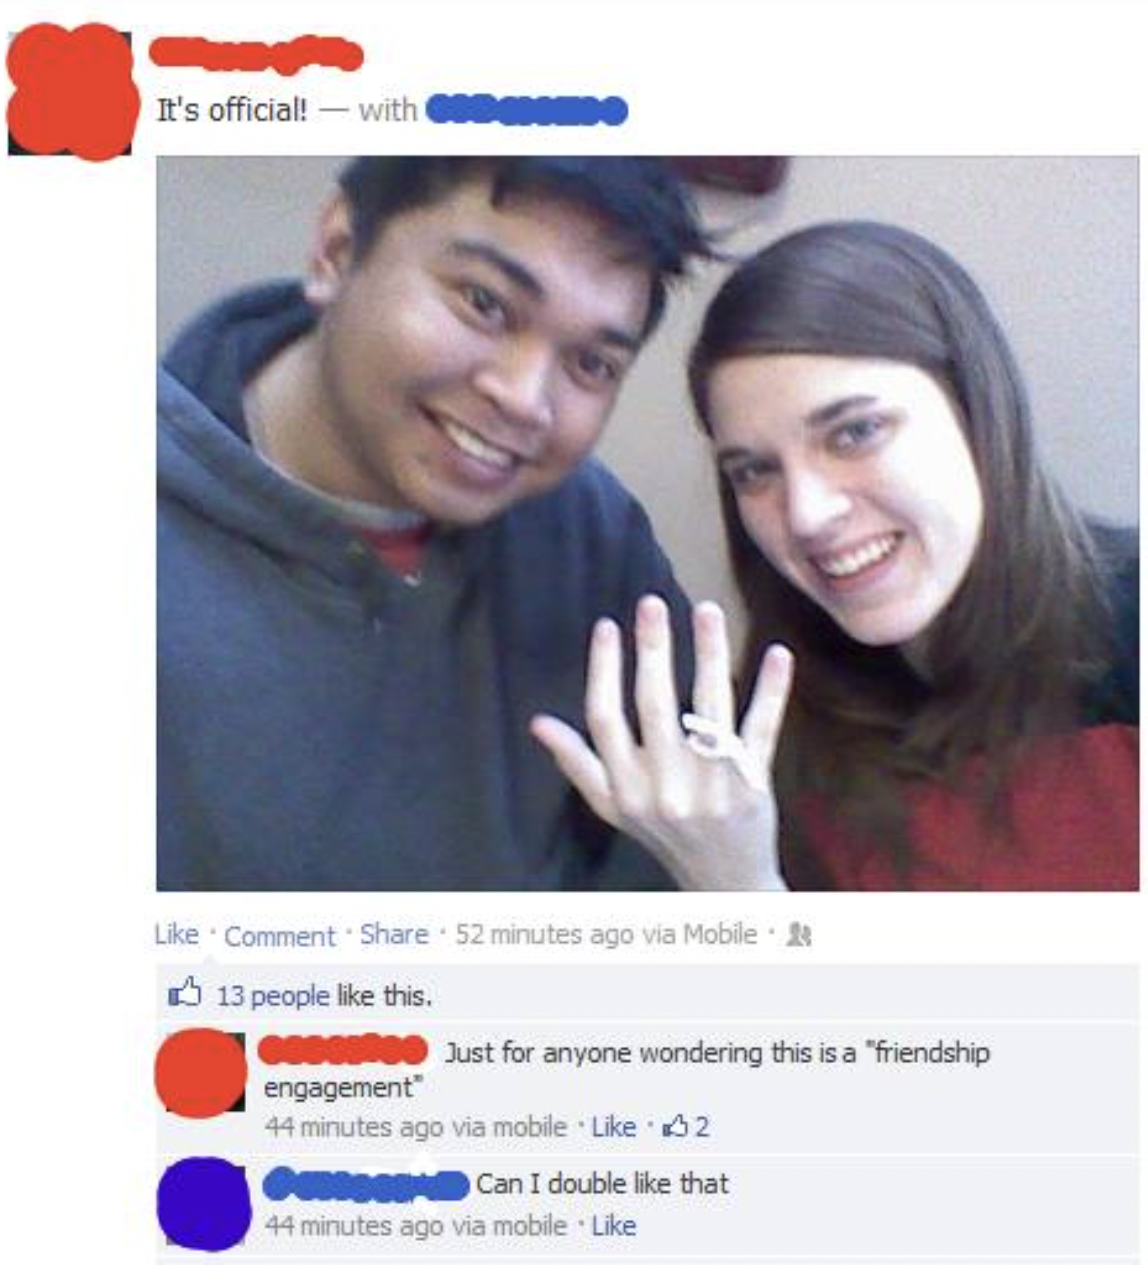 Cringey Pics - friendship engagement - It's official! with some Comment